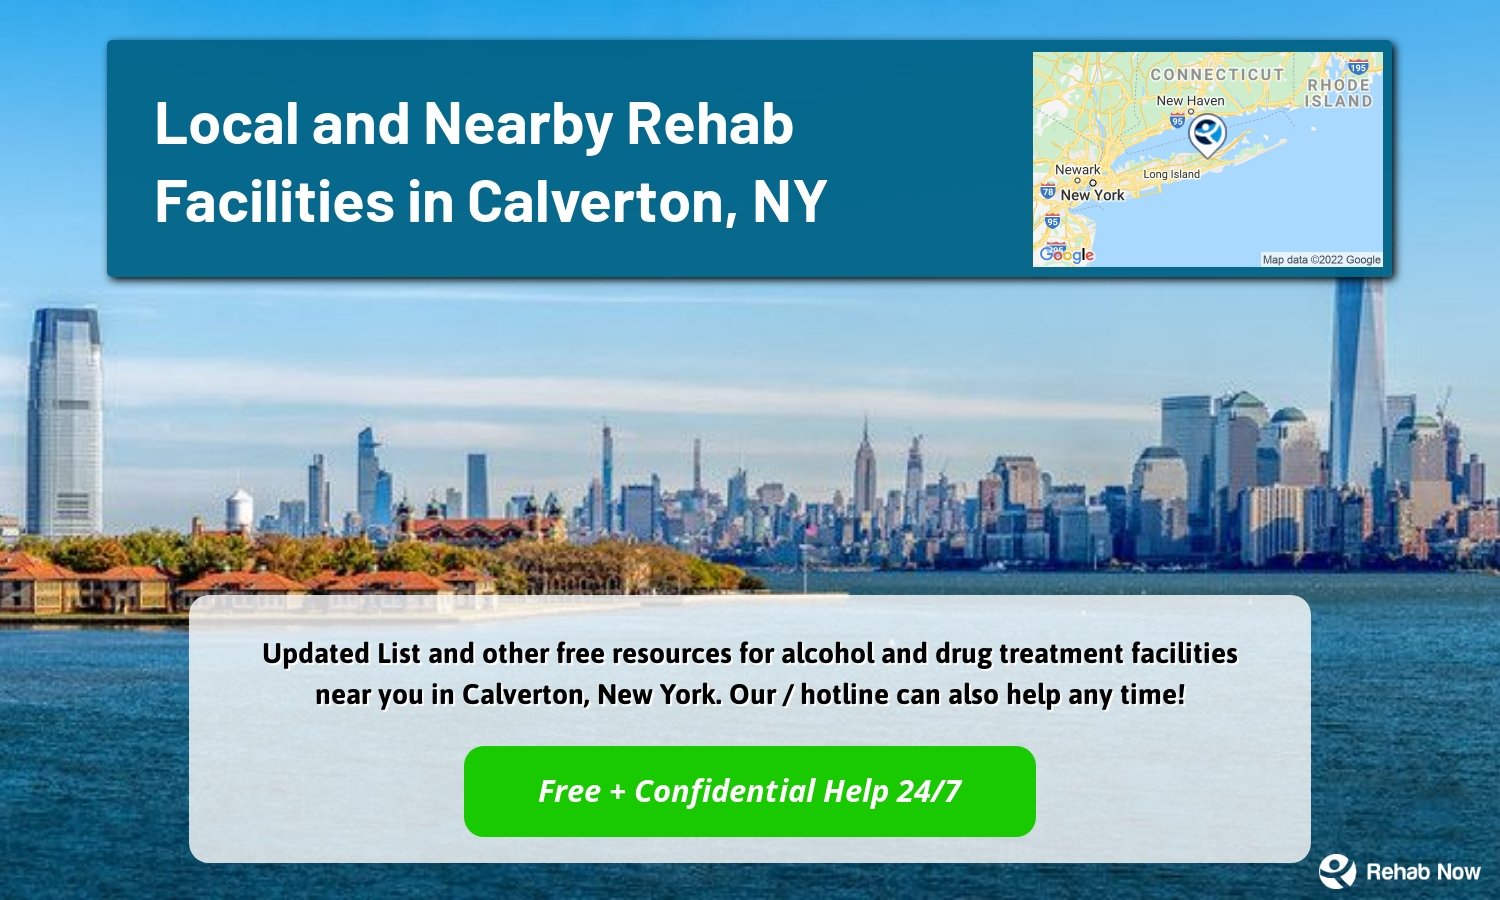  Updated List and other free resources for alcohol and drug treatment facilities near you in Calverton, New York. Our / hotline can also help any time!